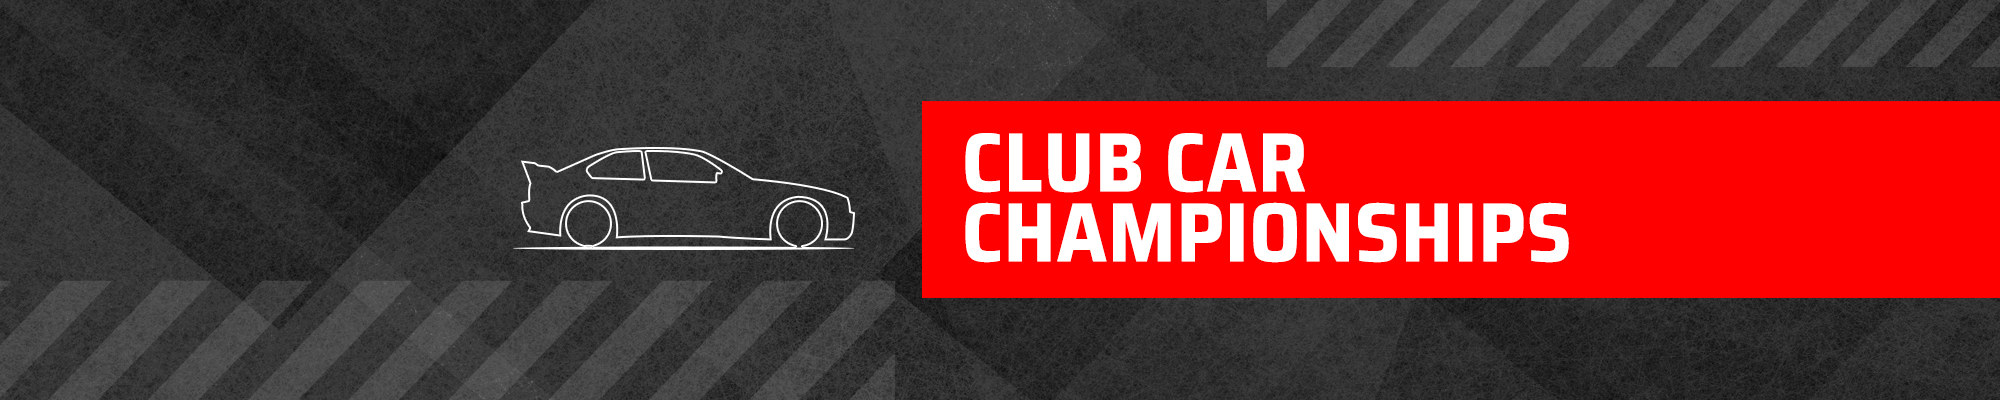 GT Cup and MSVR Club Car Championships